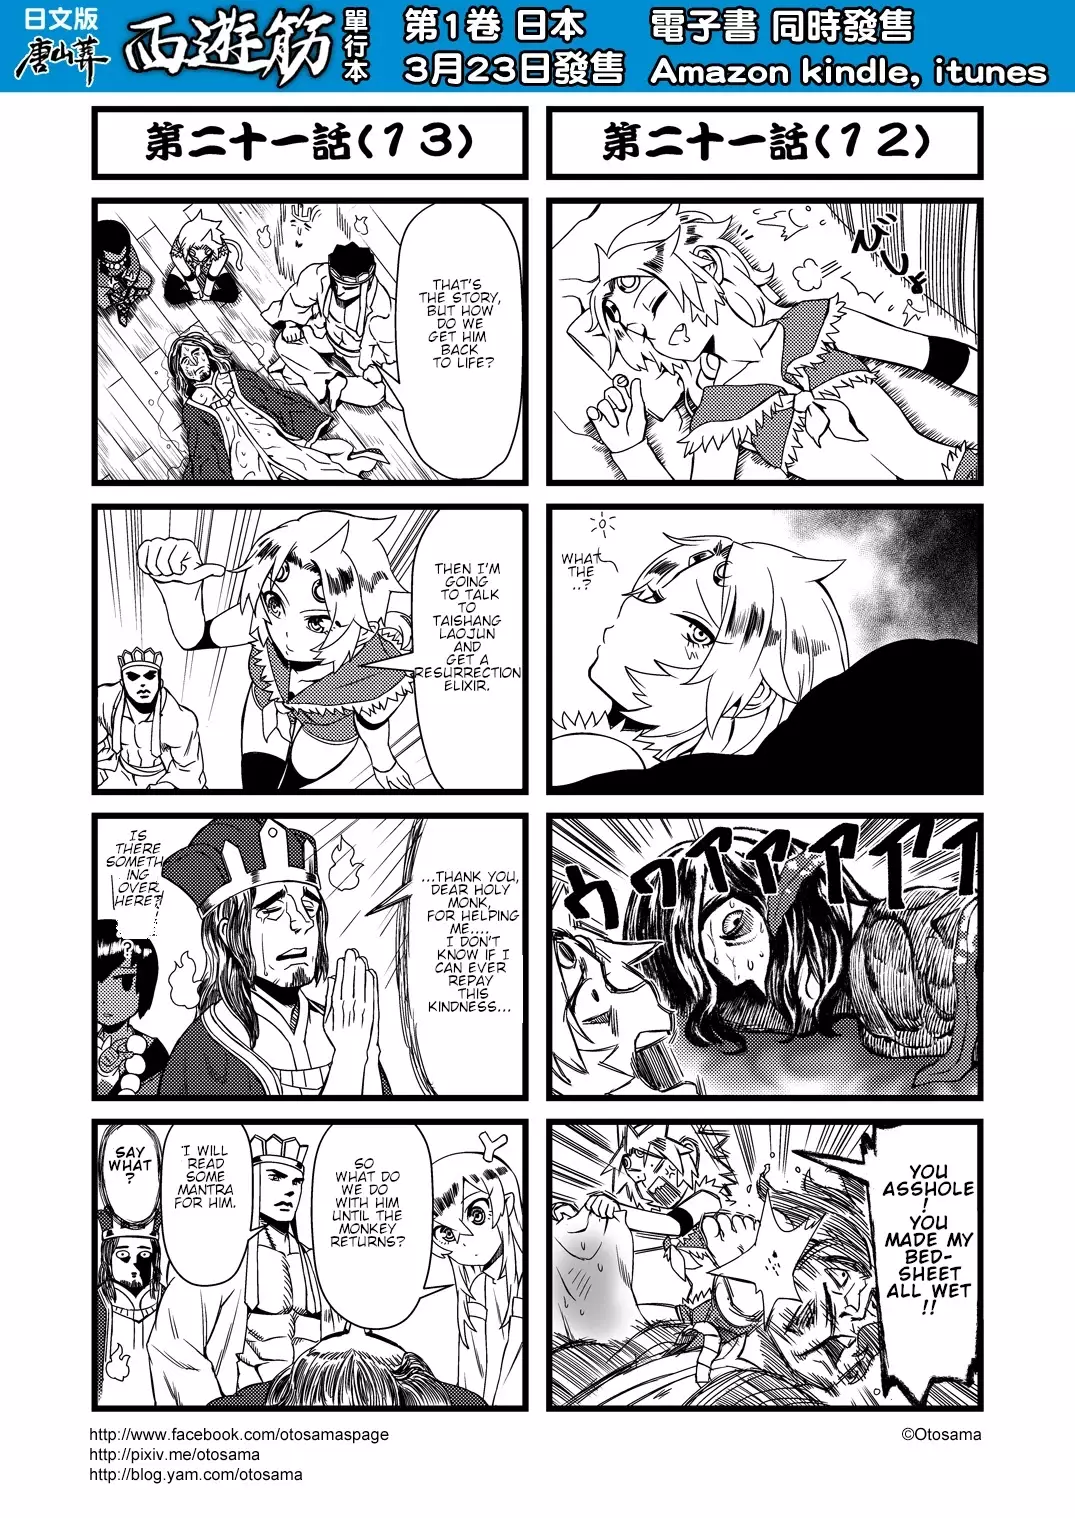 Tang Hill Burial - Journey To The West Irresponsible Anything Goes Edition - 21 page 7-69f3e1d5